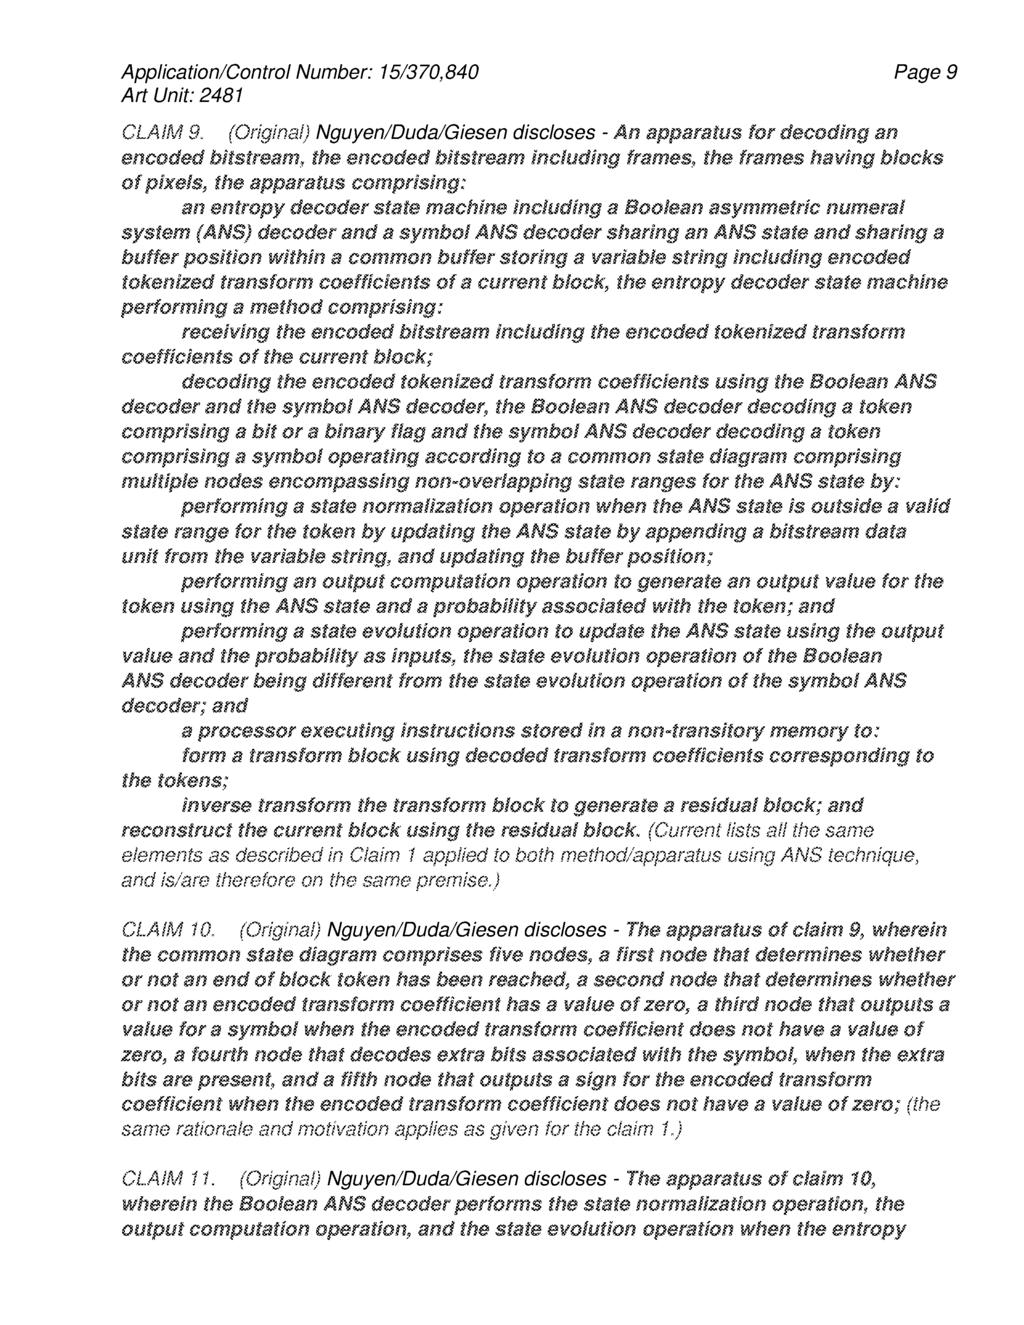 Page9 CLAIM 9" (Original) Nguyen/Duda/Giesen discloses - An apparatus for decoding an encoded bitstreamj the encoded bitstream including frames, the frames having blocks of pixels, the apparatus